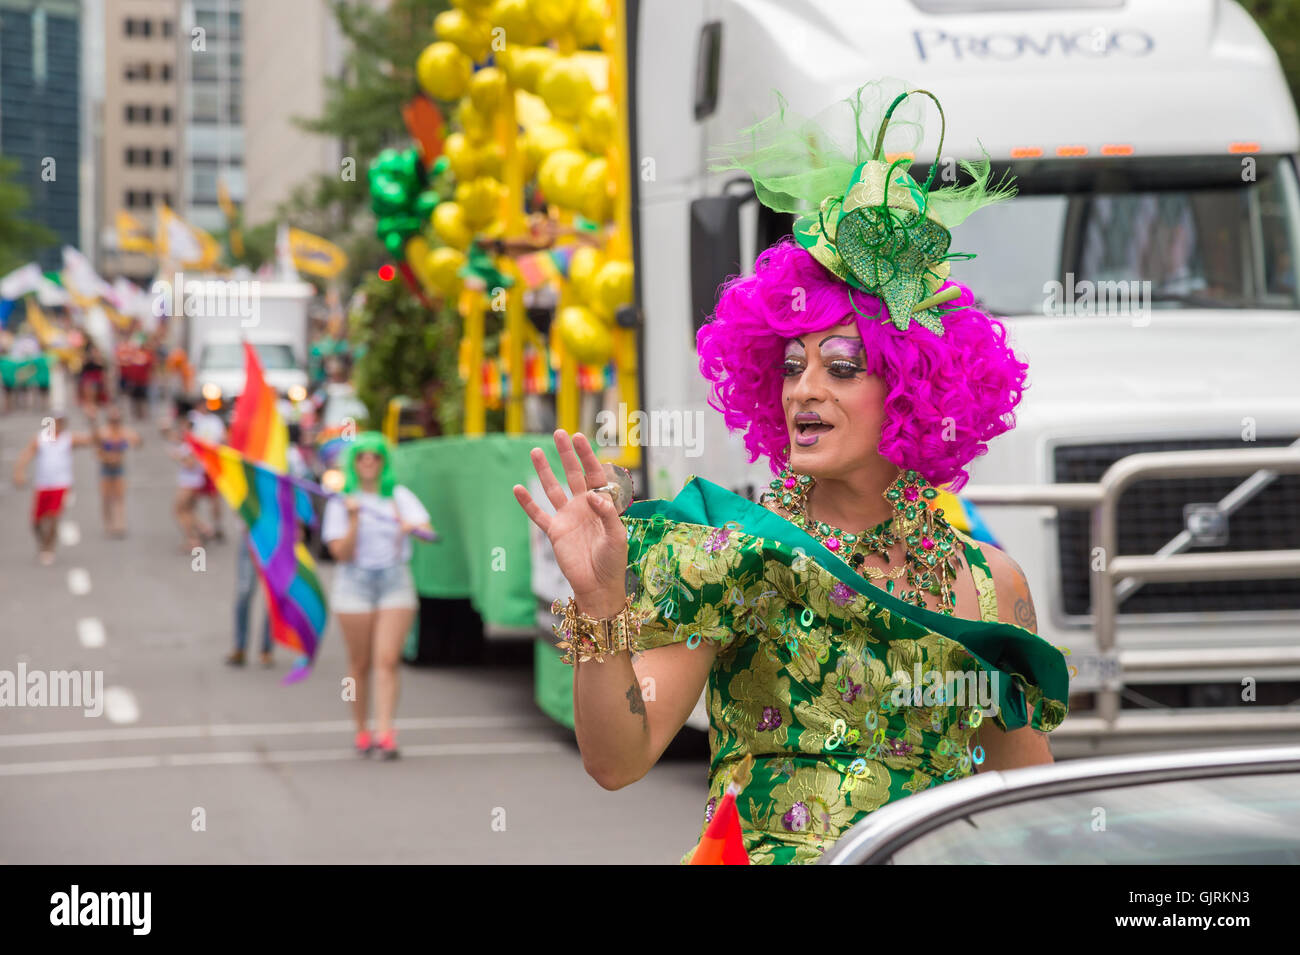 Montreal, CA - 14 August 2016: Mado at Montreal Pride Parade. Mado is a famous drag-queen who runs a drag cabaret, Cabaret Mado, Stock Photo